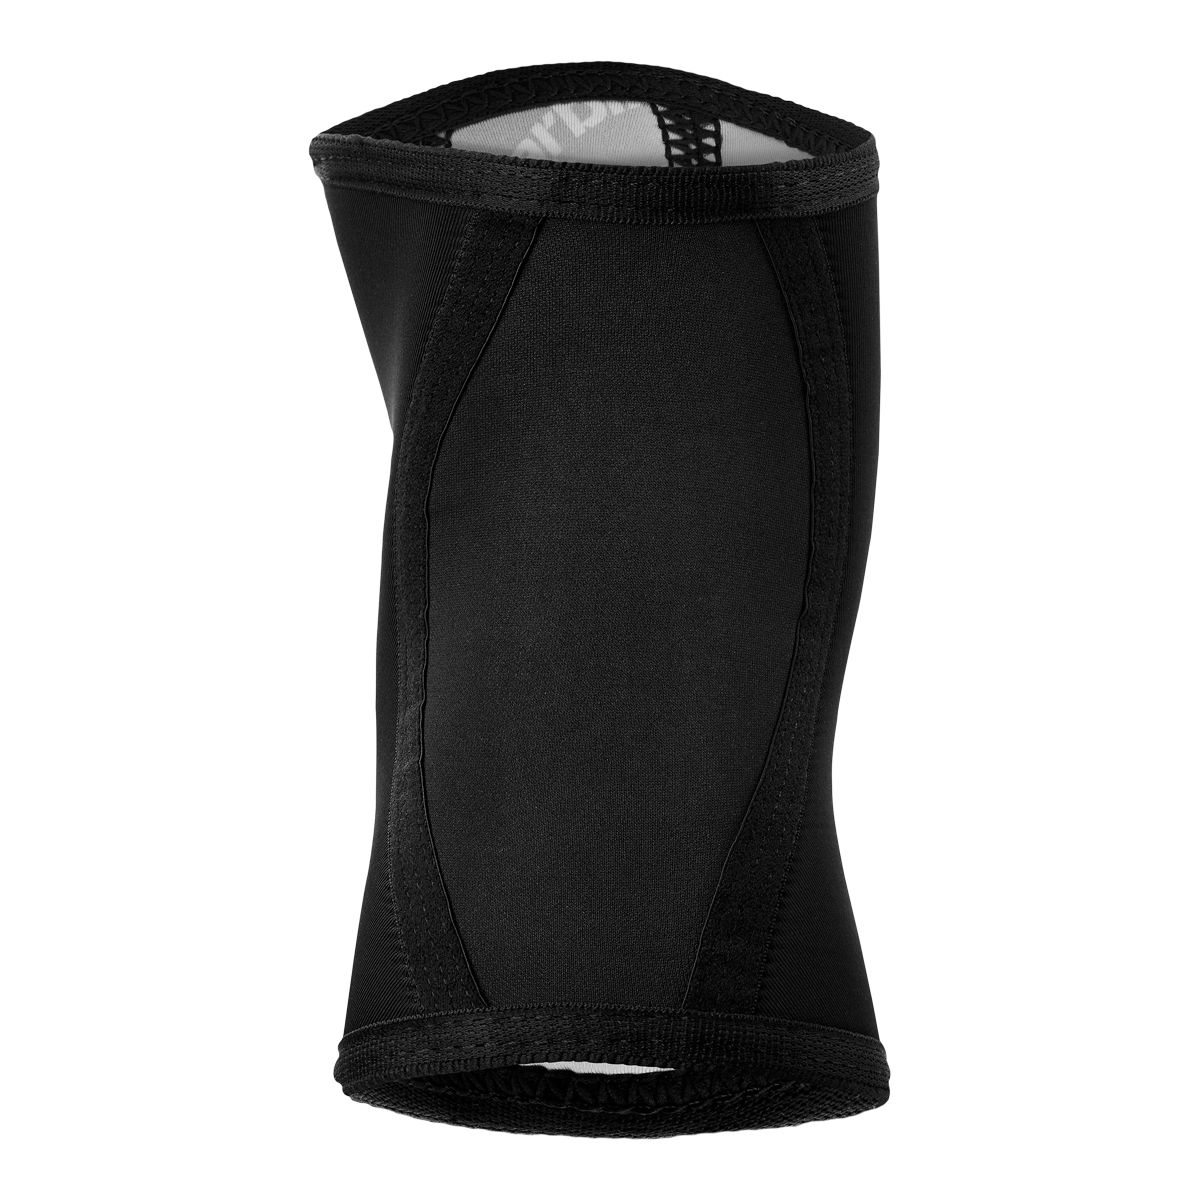 Nike Pro Open Knee Sleeve with Strap